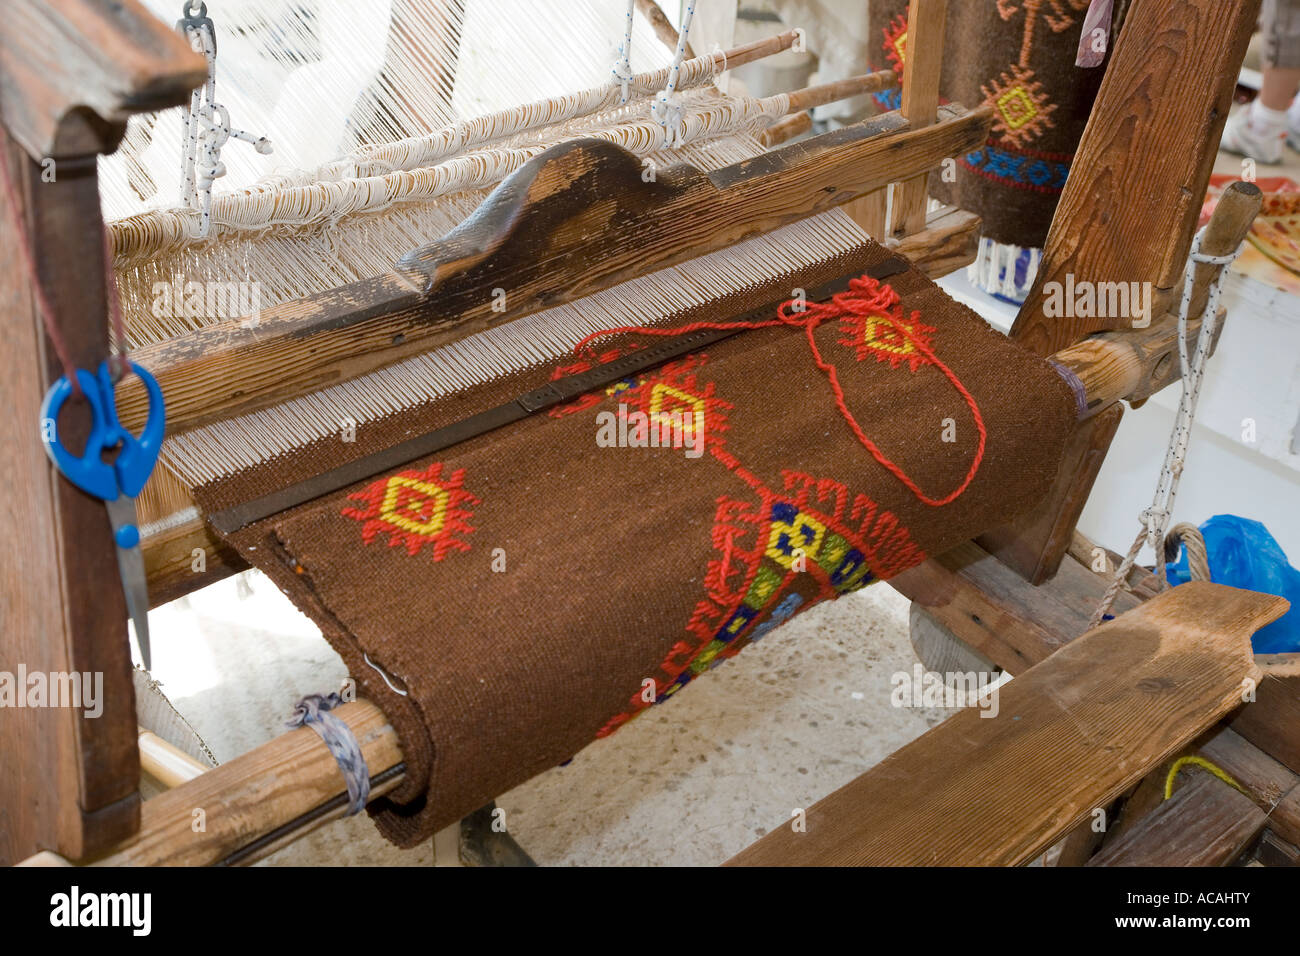 A weaving loom with a carpet on it, Crete, Greece Stock Photo